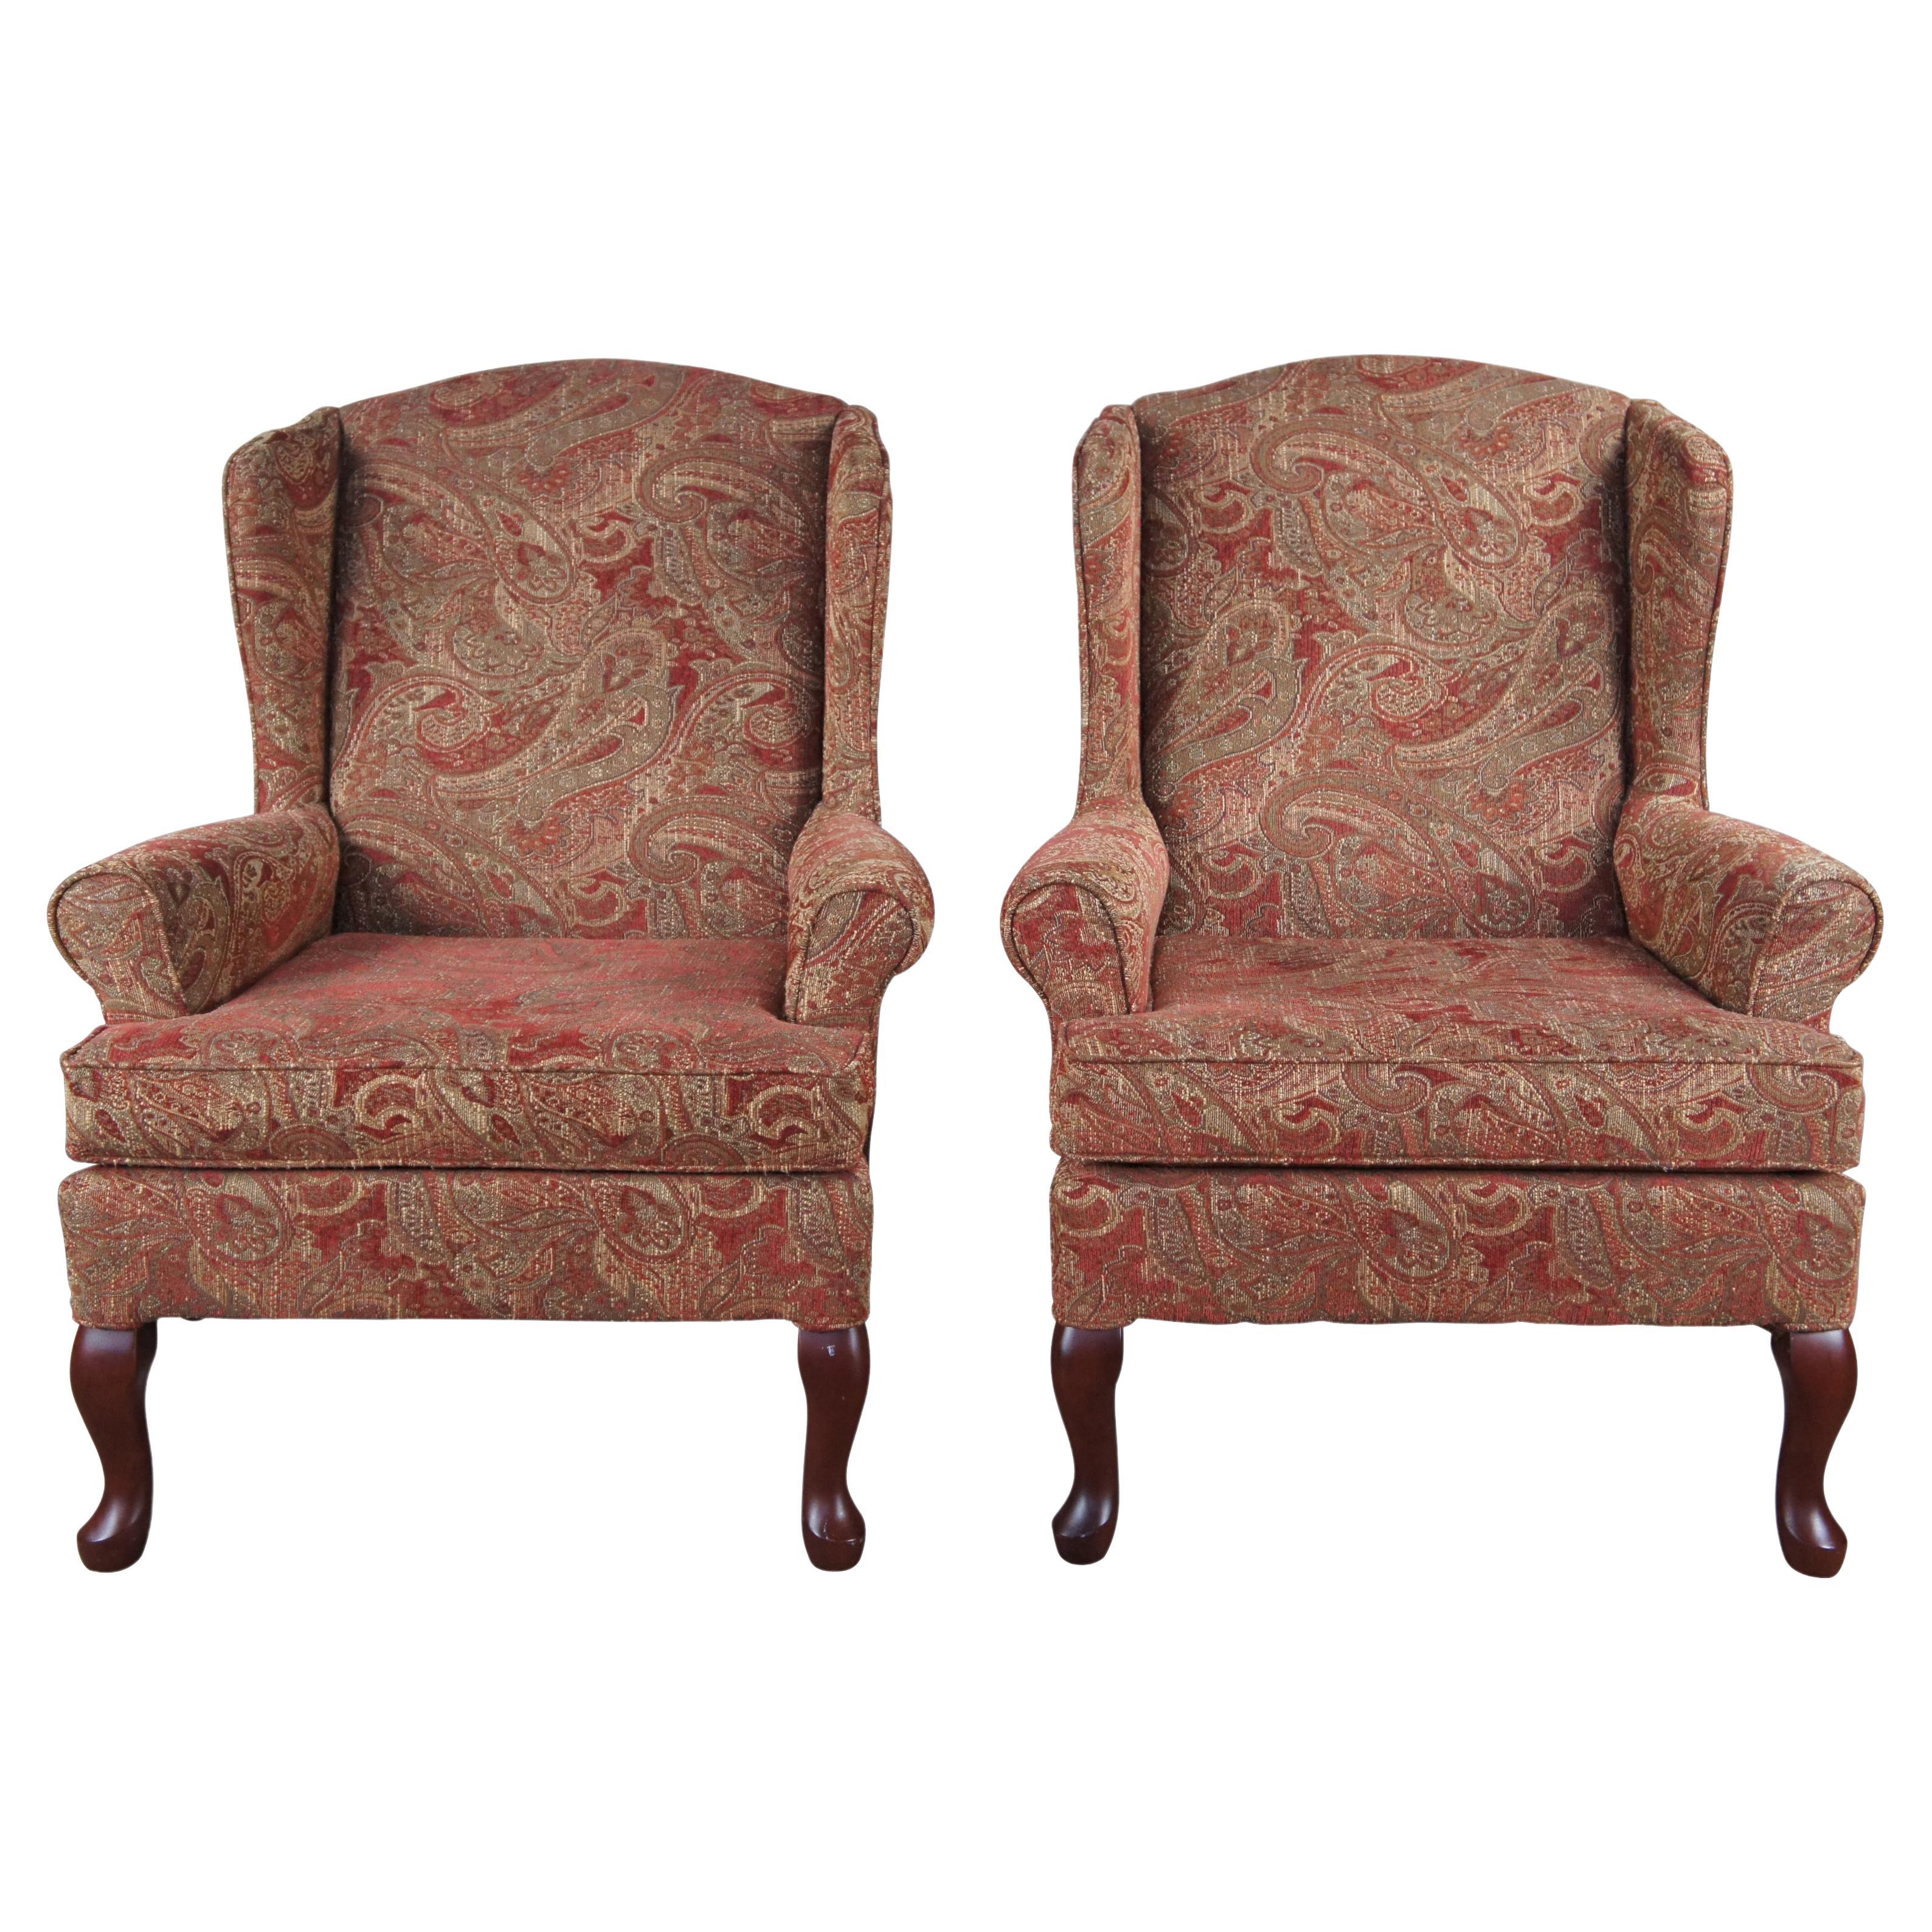 2 Best Home Furnishings Queen Anne Style Wingback Arm Chairs Paisley Fabric Pair